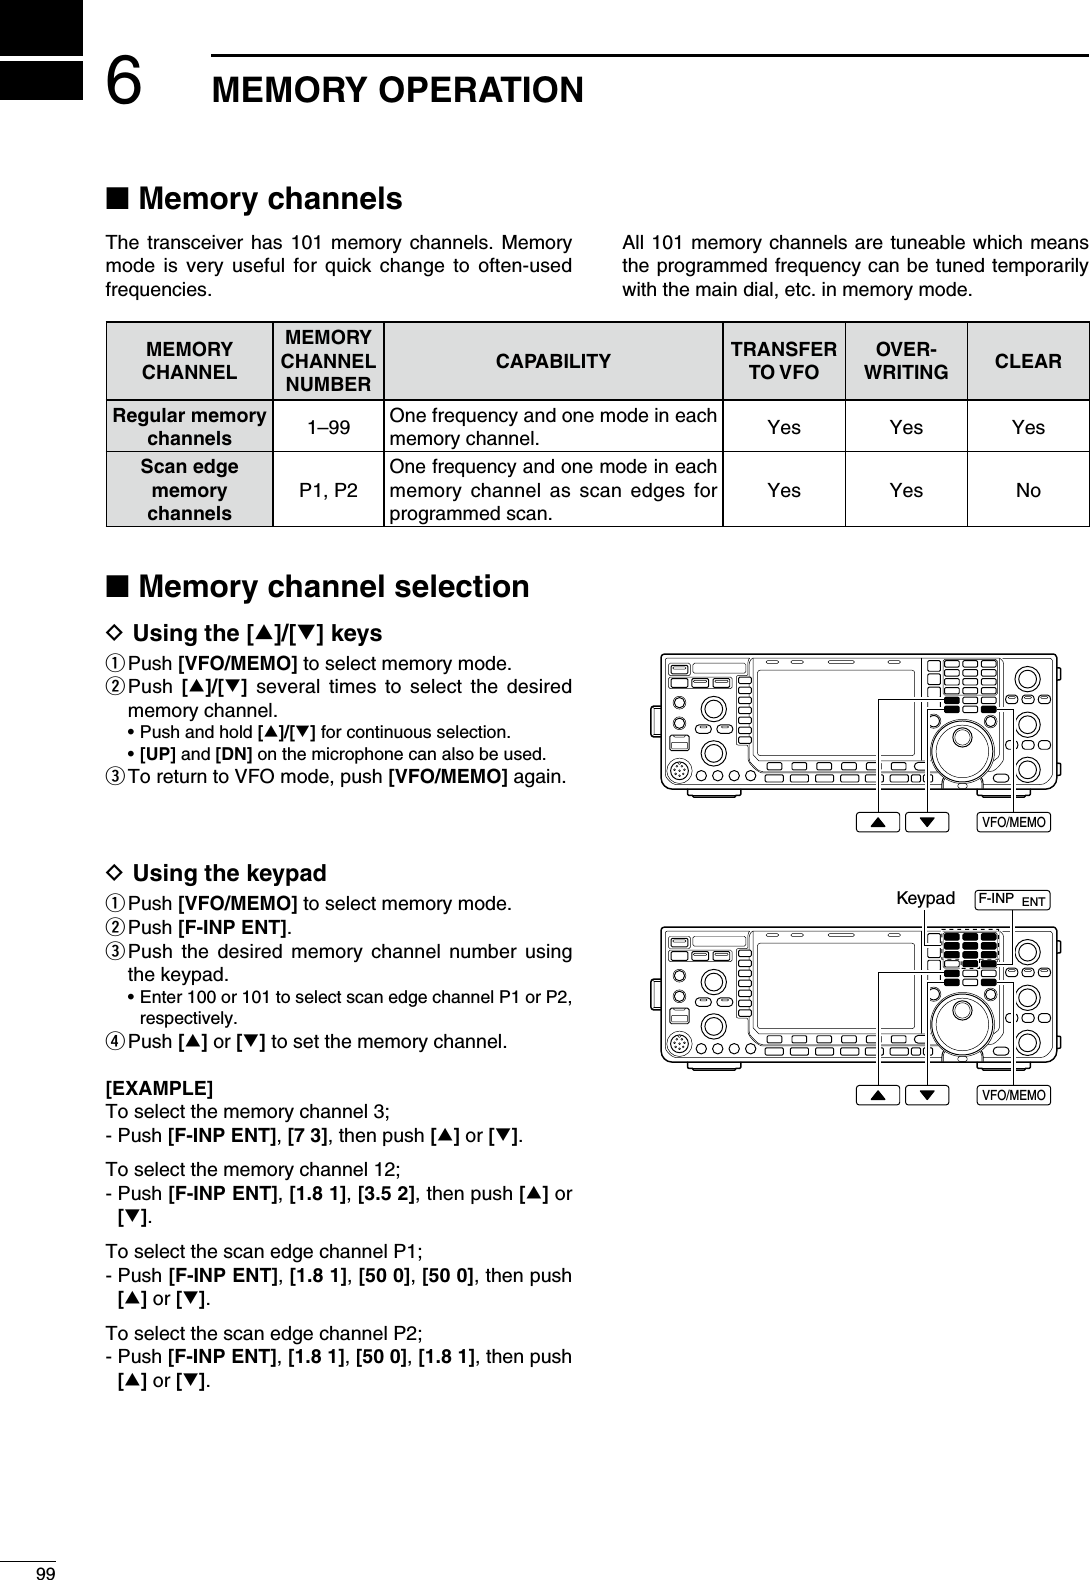 N Memory channelsThe transceiver has 101 memory channels. Memory mode is very useful for quick change to often-used frequencies.All 101 memory channels are tuneable which means the programmed frequency can be tuned temporarily with the main dial, etc. in memory mode.MEMORYCHANNELMEMORYCHANNELNUMBERCAPABILITY TRANSFERTO VFOOVER-WRITING CLEARRegular memory channels 1–99 One frequency and one mode in each memory channel. Yes Yes YesScan edgememorychannelsP1, P2One frequency and one mode in each memory channel as scan edges for programmed scan.Yes Yes NoN Memory channel selectionD Using the [∫]/[√] keysq Push  [VFO/MEMO] to select memory mode.w  Push  [∫]/[√] several times to select the desired memory channel.  • Push and hold [∫]/[√] for continuous selection. • [UP] and [DN] on the microphone can also be used.e To return to VFO mode, push [VFO/MEMO] again.D Using the keypadq Push  [VFO/MEMO] to select memory mode.w Push  [F-INP ENT].e  Push the desired memory channel number using the keypad. •  Enter 100 or 101 to select scan edge channel P1 or P2, respectively.r  Push [∫] or [√] to set the memory channel.[EXAMPLE]To select the memory channel 3;- Push [F-INP ENT], [7 3], then push [∫] or [√].To select the memory channel 12;-  Push [F-INP ENT], [1.8 1], [3.5 2], then push [∫] or [√].To select the scan edge channel P1;-  Push [F-INP ENT], [1.8 1], [50 0], [50 0], then push [∫] or [√].To select the scan edge channel P2;-  Push [F-INP ENT], [1.8 1], [50 0], [1.8 1], then push [∫] or [√].VFO/MEMOVFO/MEMOKeypad F-INP  ENT 699MEMORY OPERATION